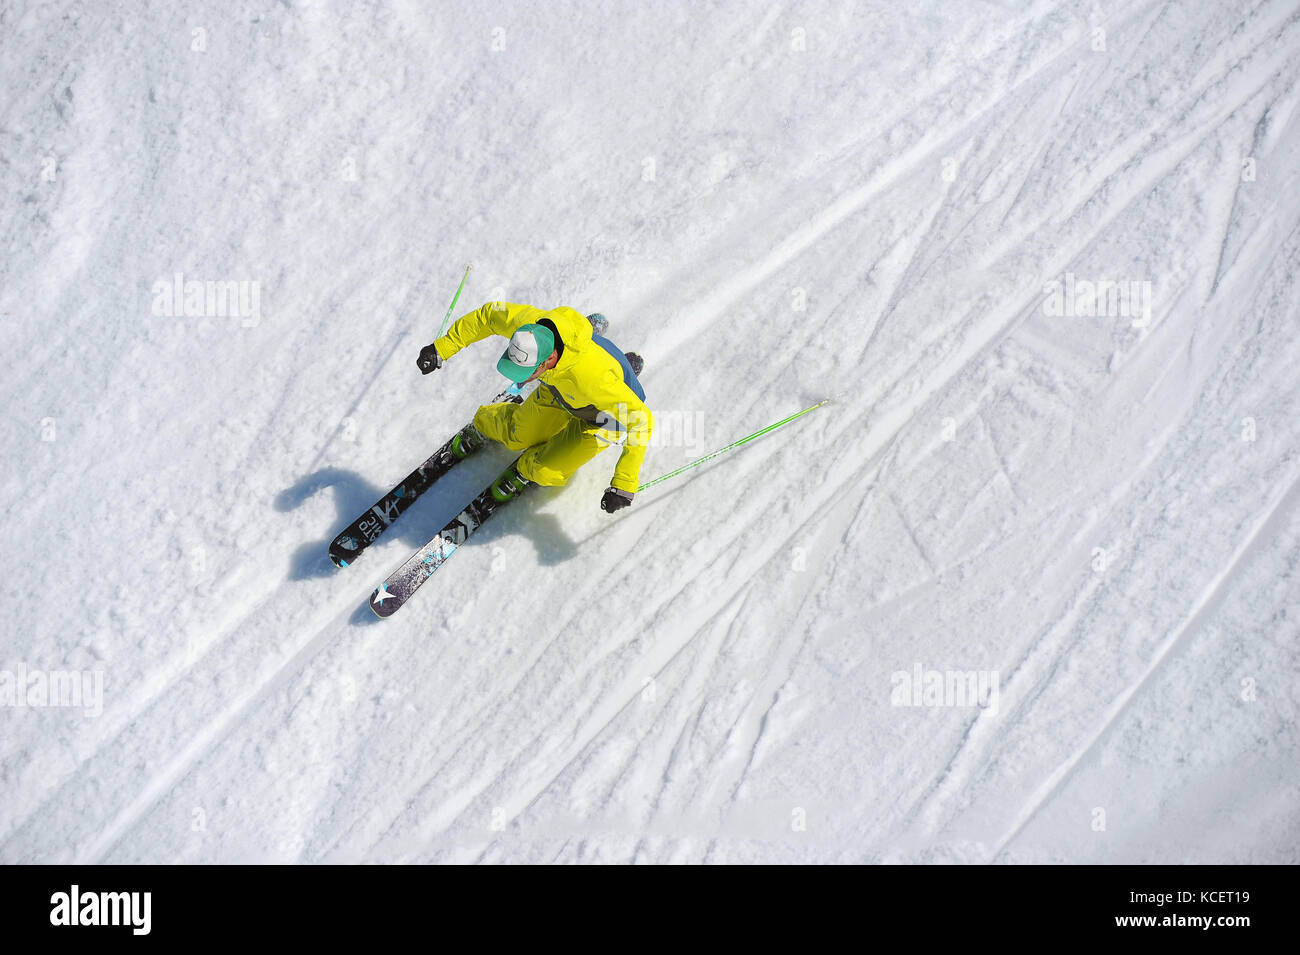 A skier carves a turn photographed from above. Stock Photo